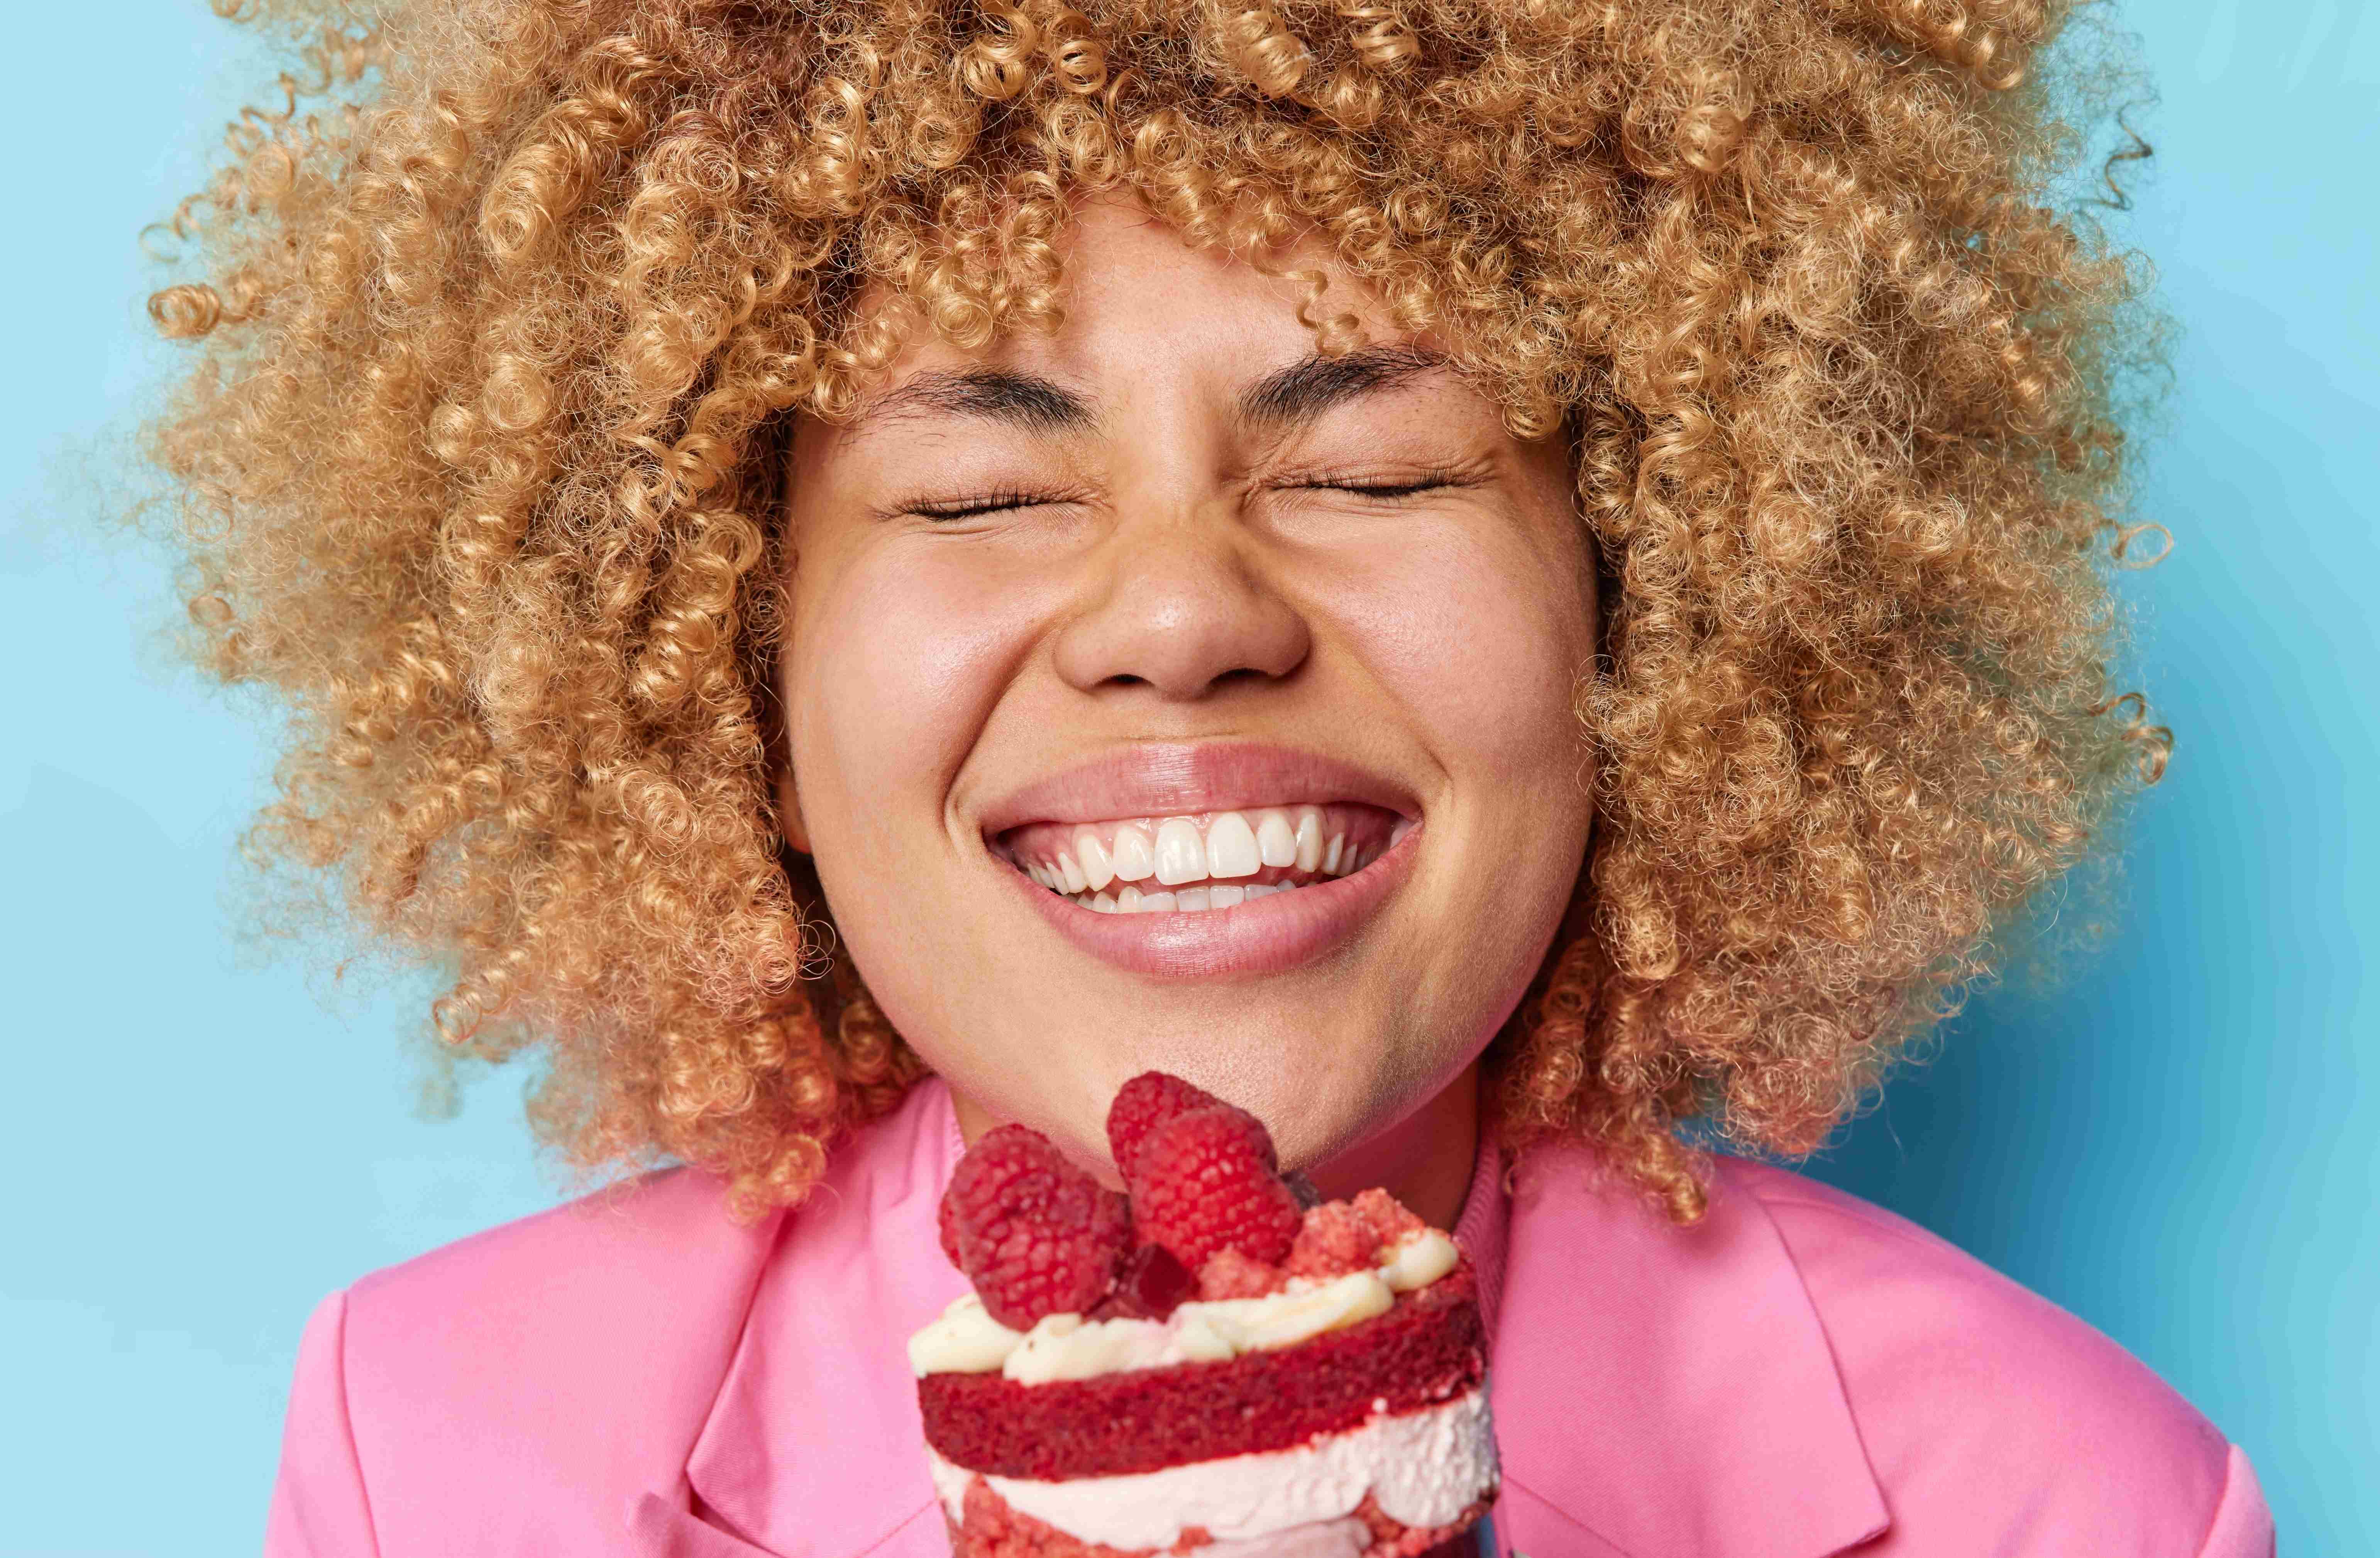 A Taurus woman is excited to enjoy a piece of cake just because.